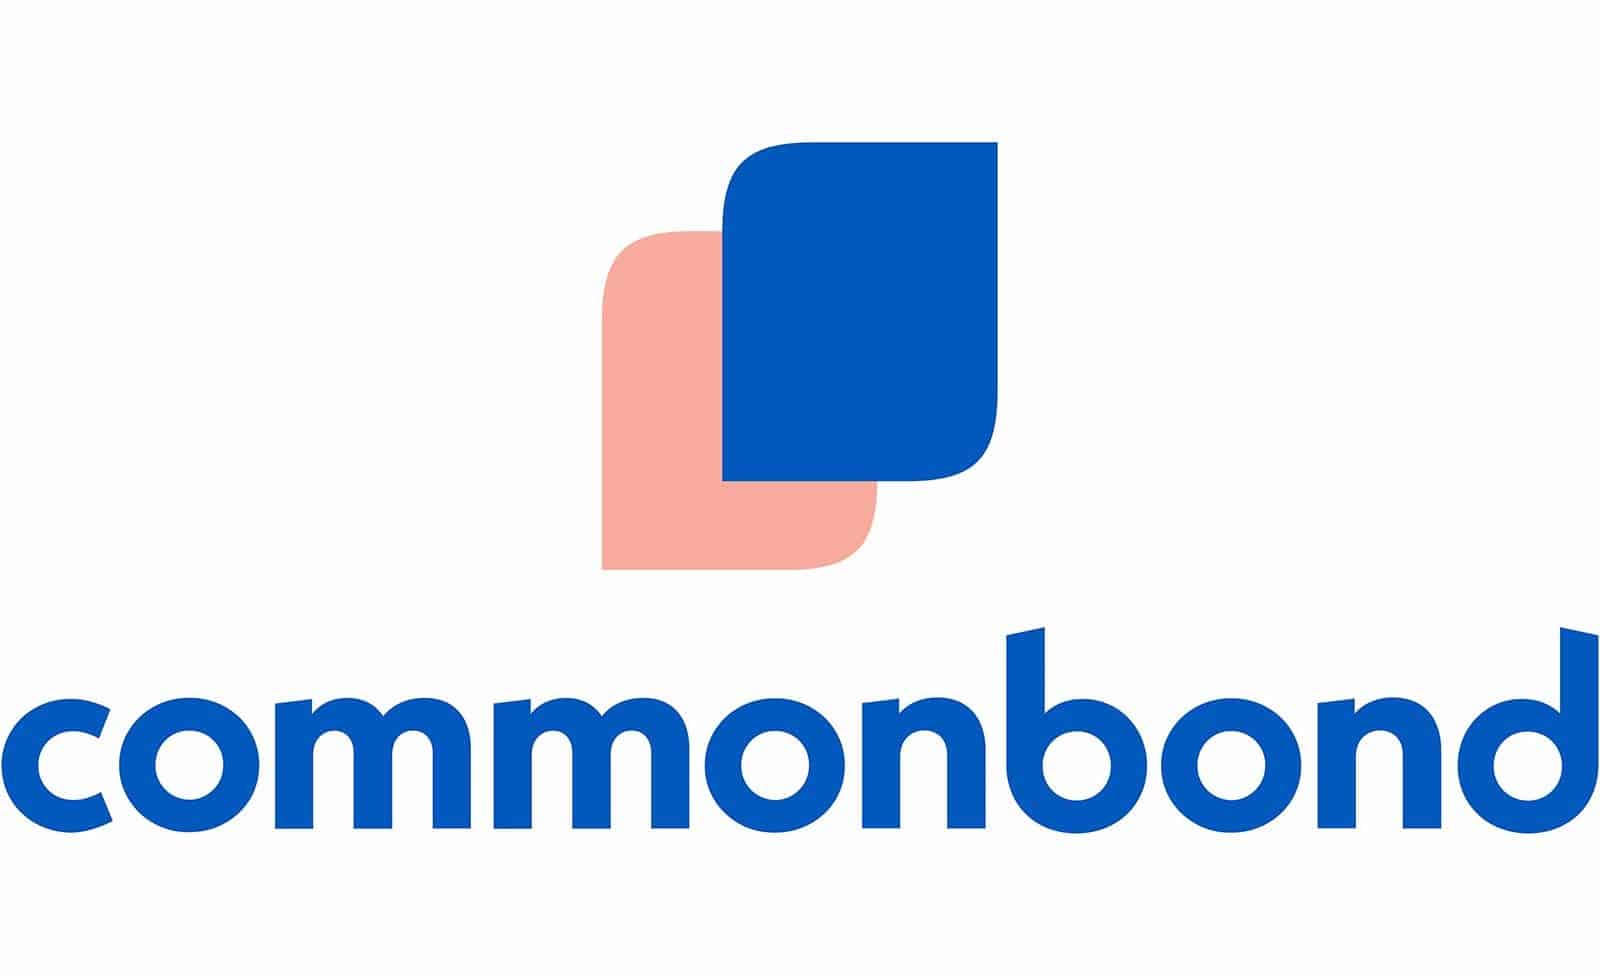 CommonBond Review